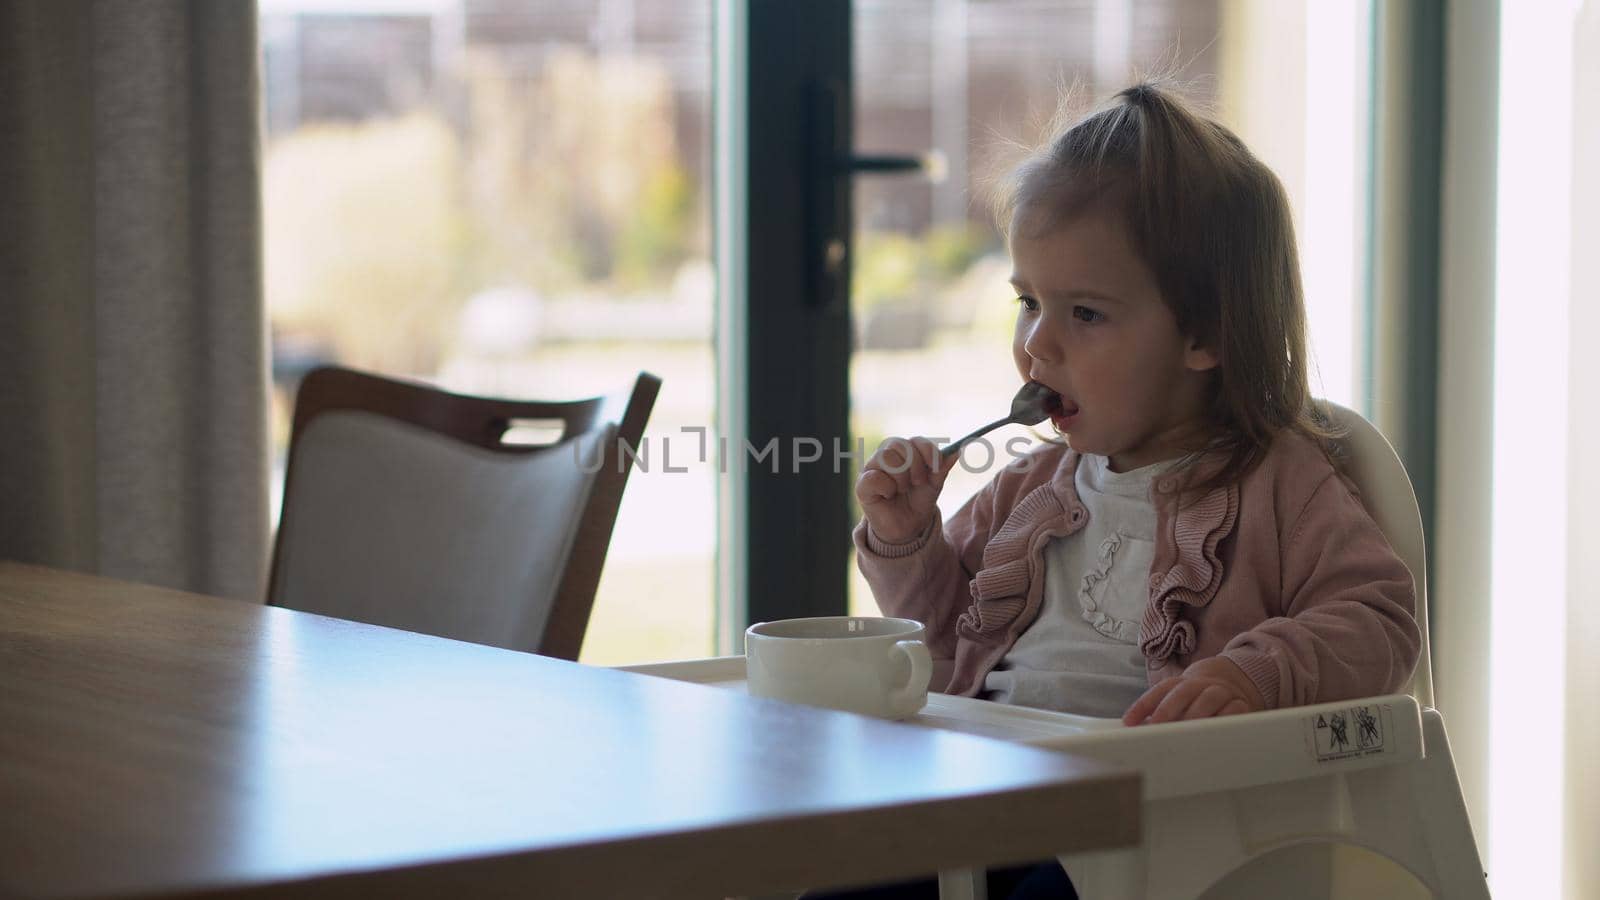 Closeup of young baby in white feeding high chair, kid is trying to eat himself, happy child with food stained face, little Girl eats porridge with spoon. High quality feeding up breakfast in kitchen by mytrykau